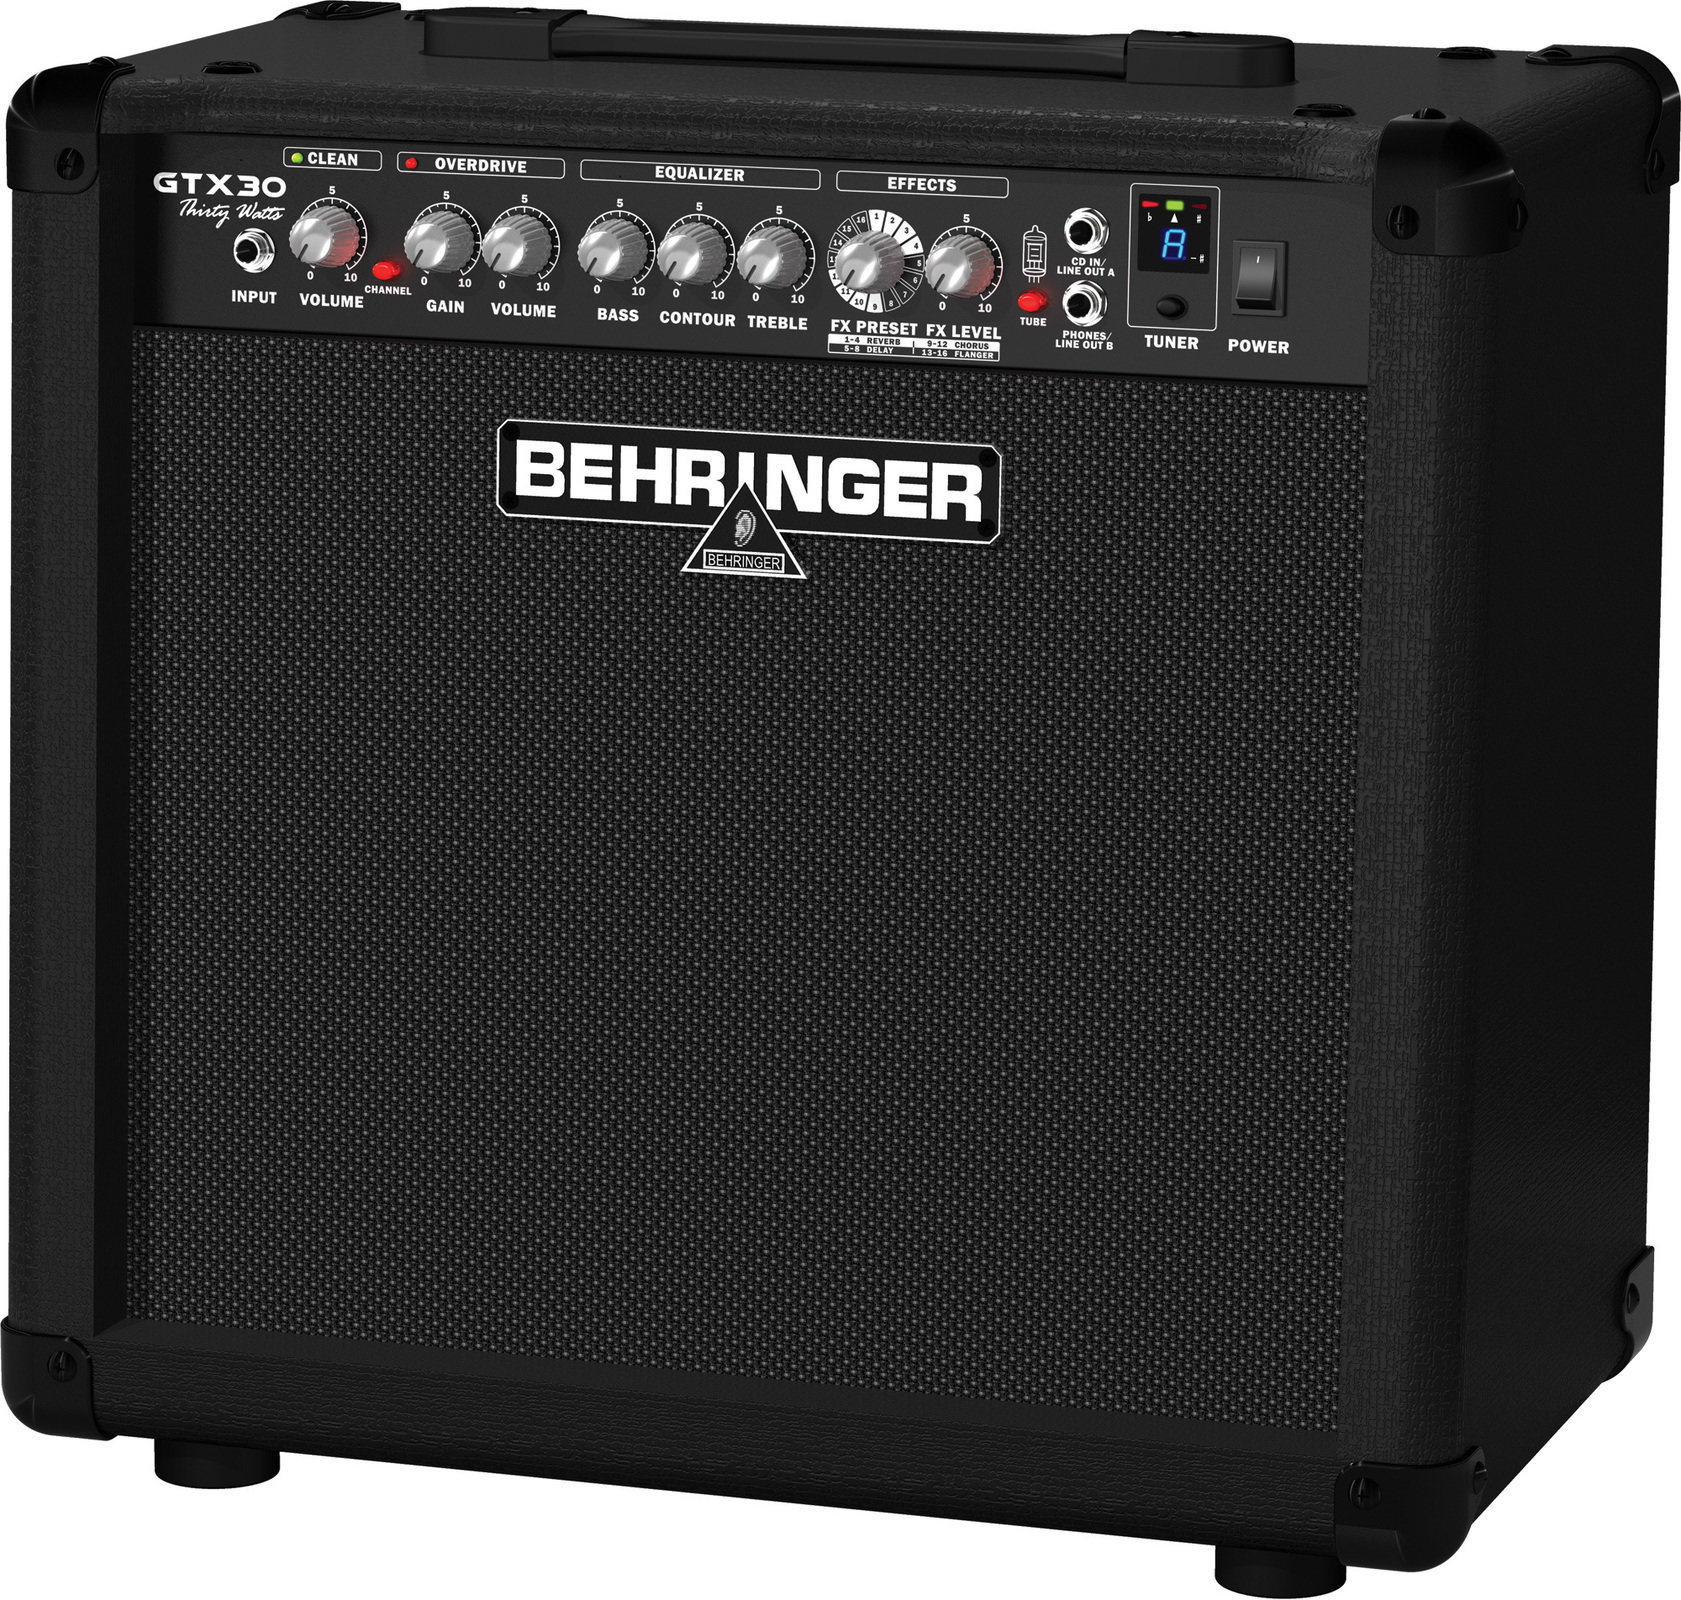 Solid-State Combo Behringer GTX 30 GUITAR AMPLIFIER